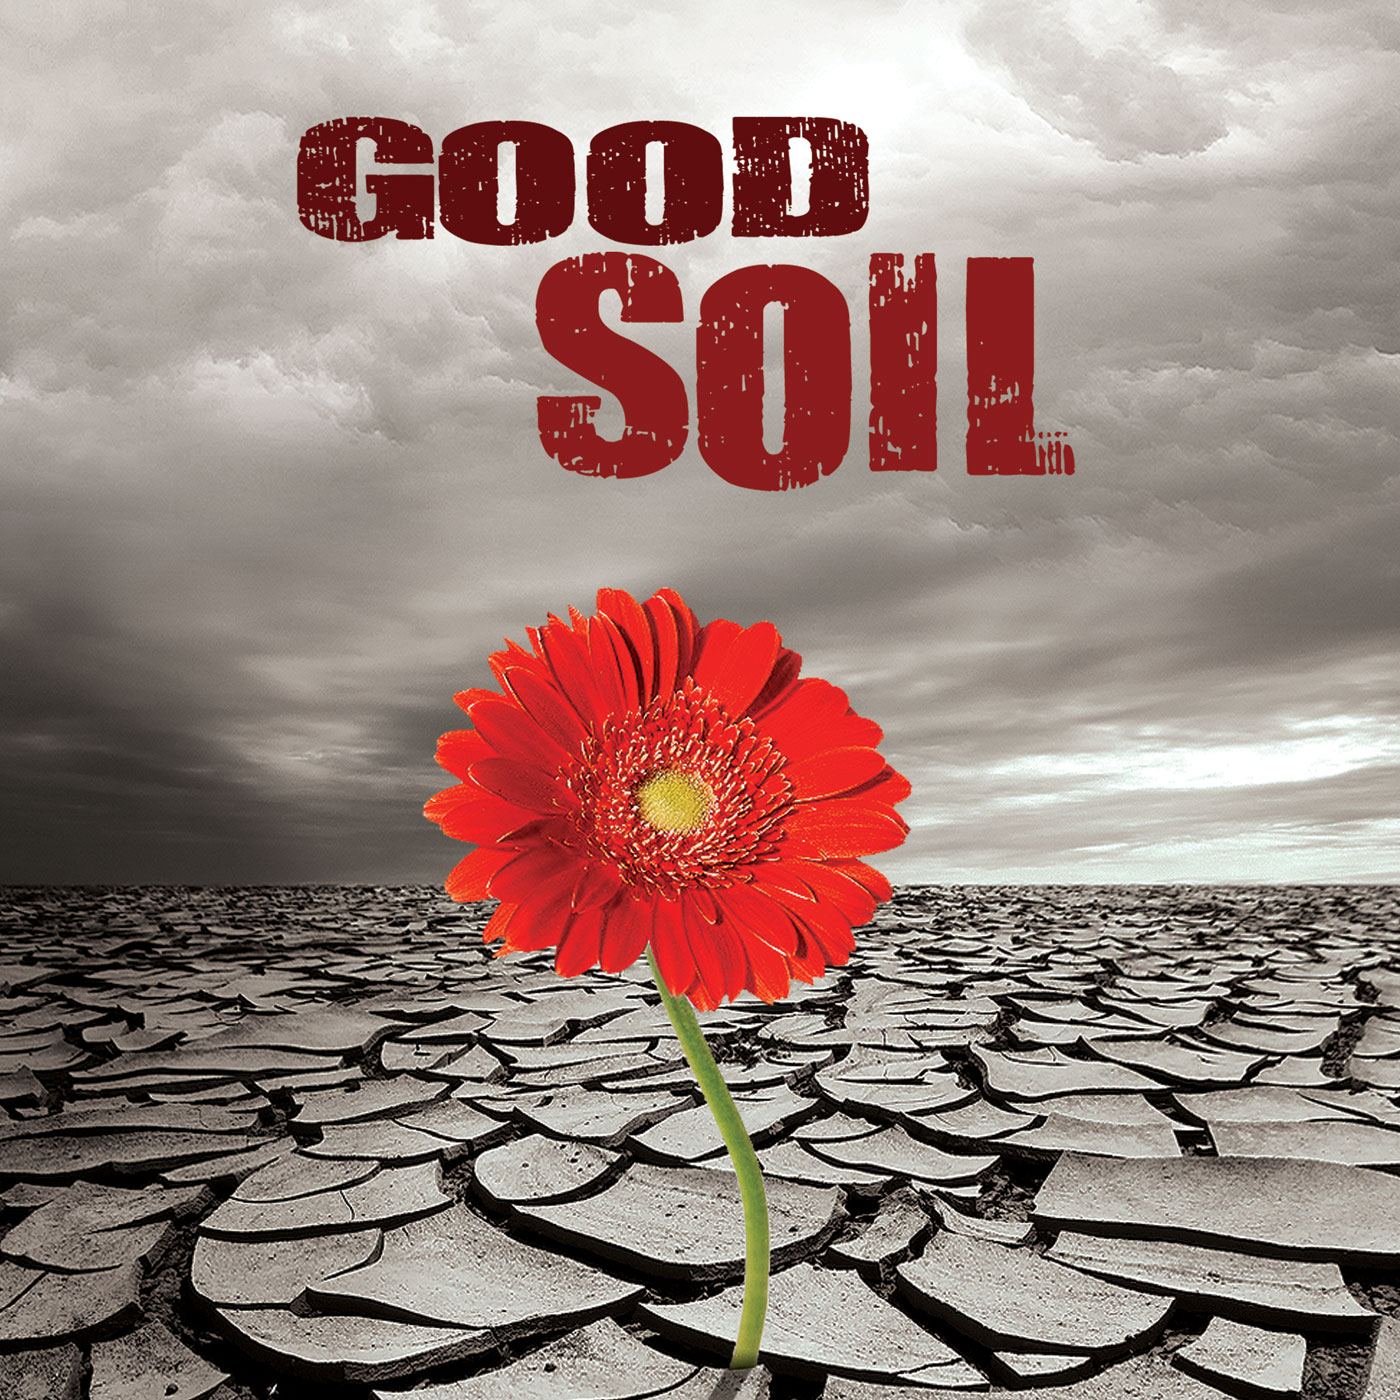 Good Soil - The Lord is Near - Rob Lewis - 1-27-2019